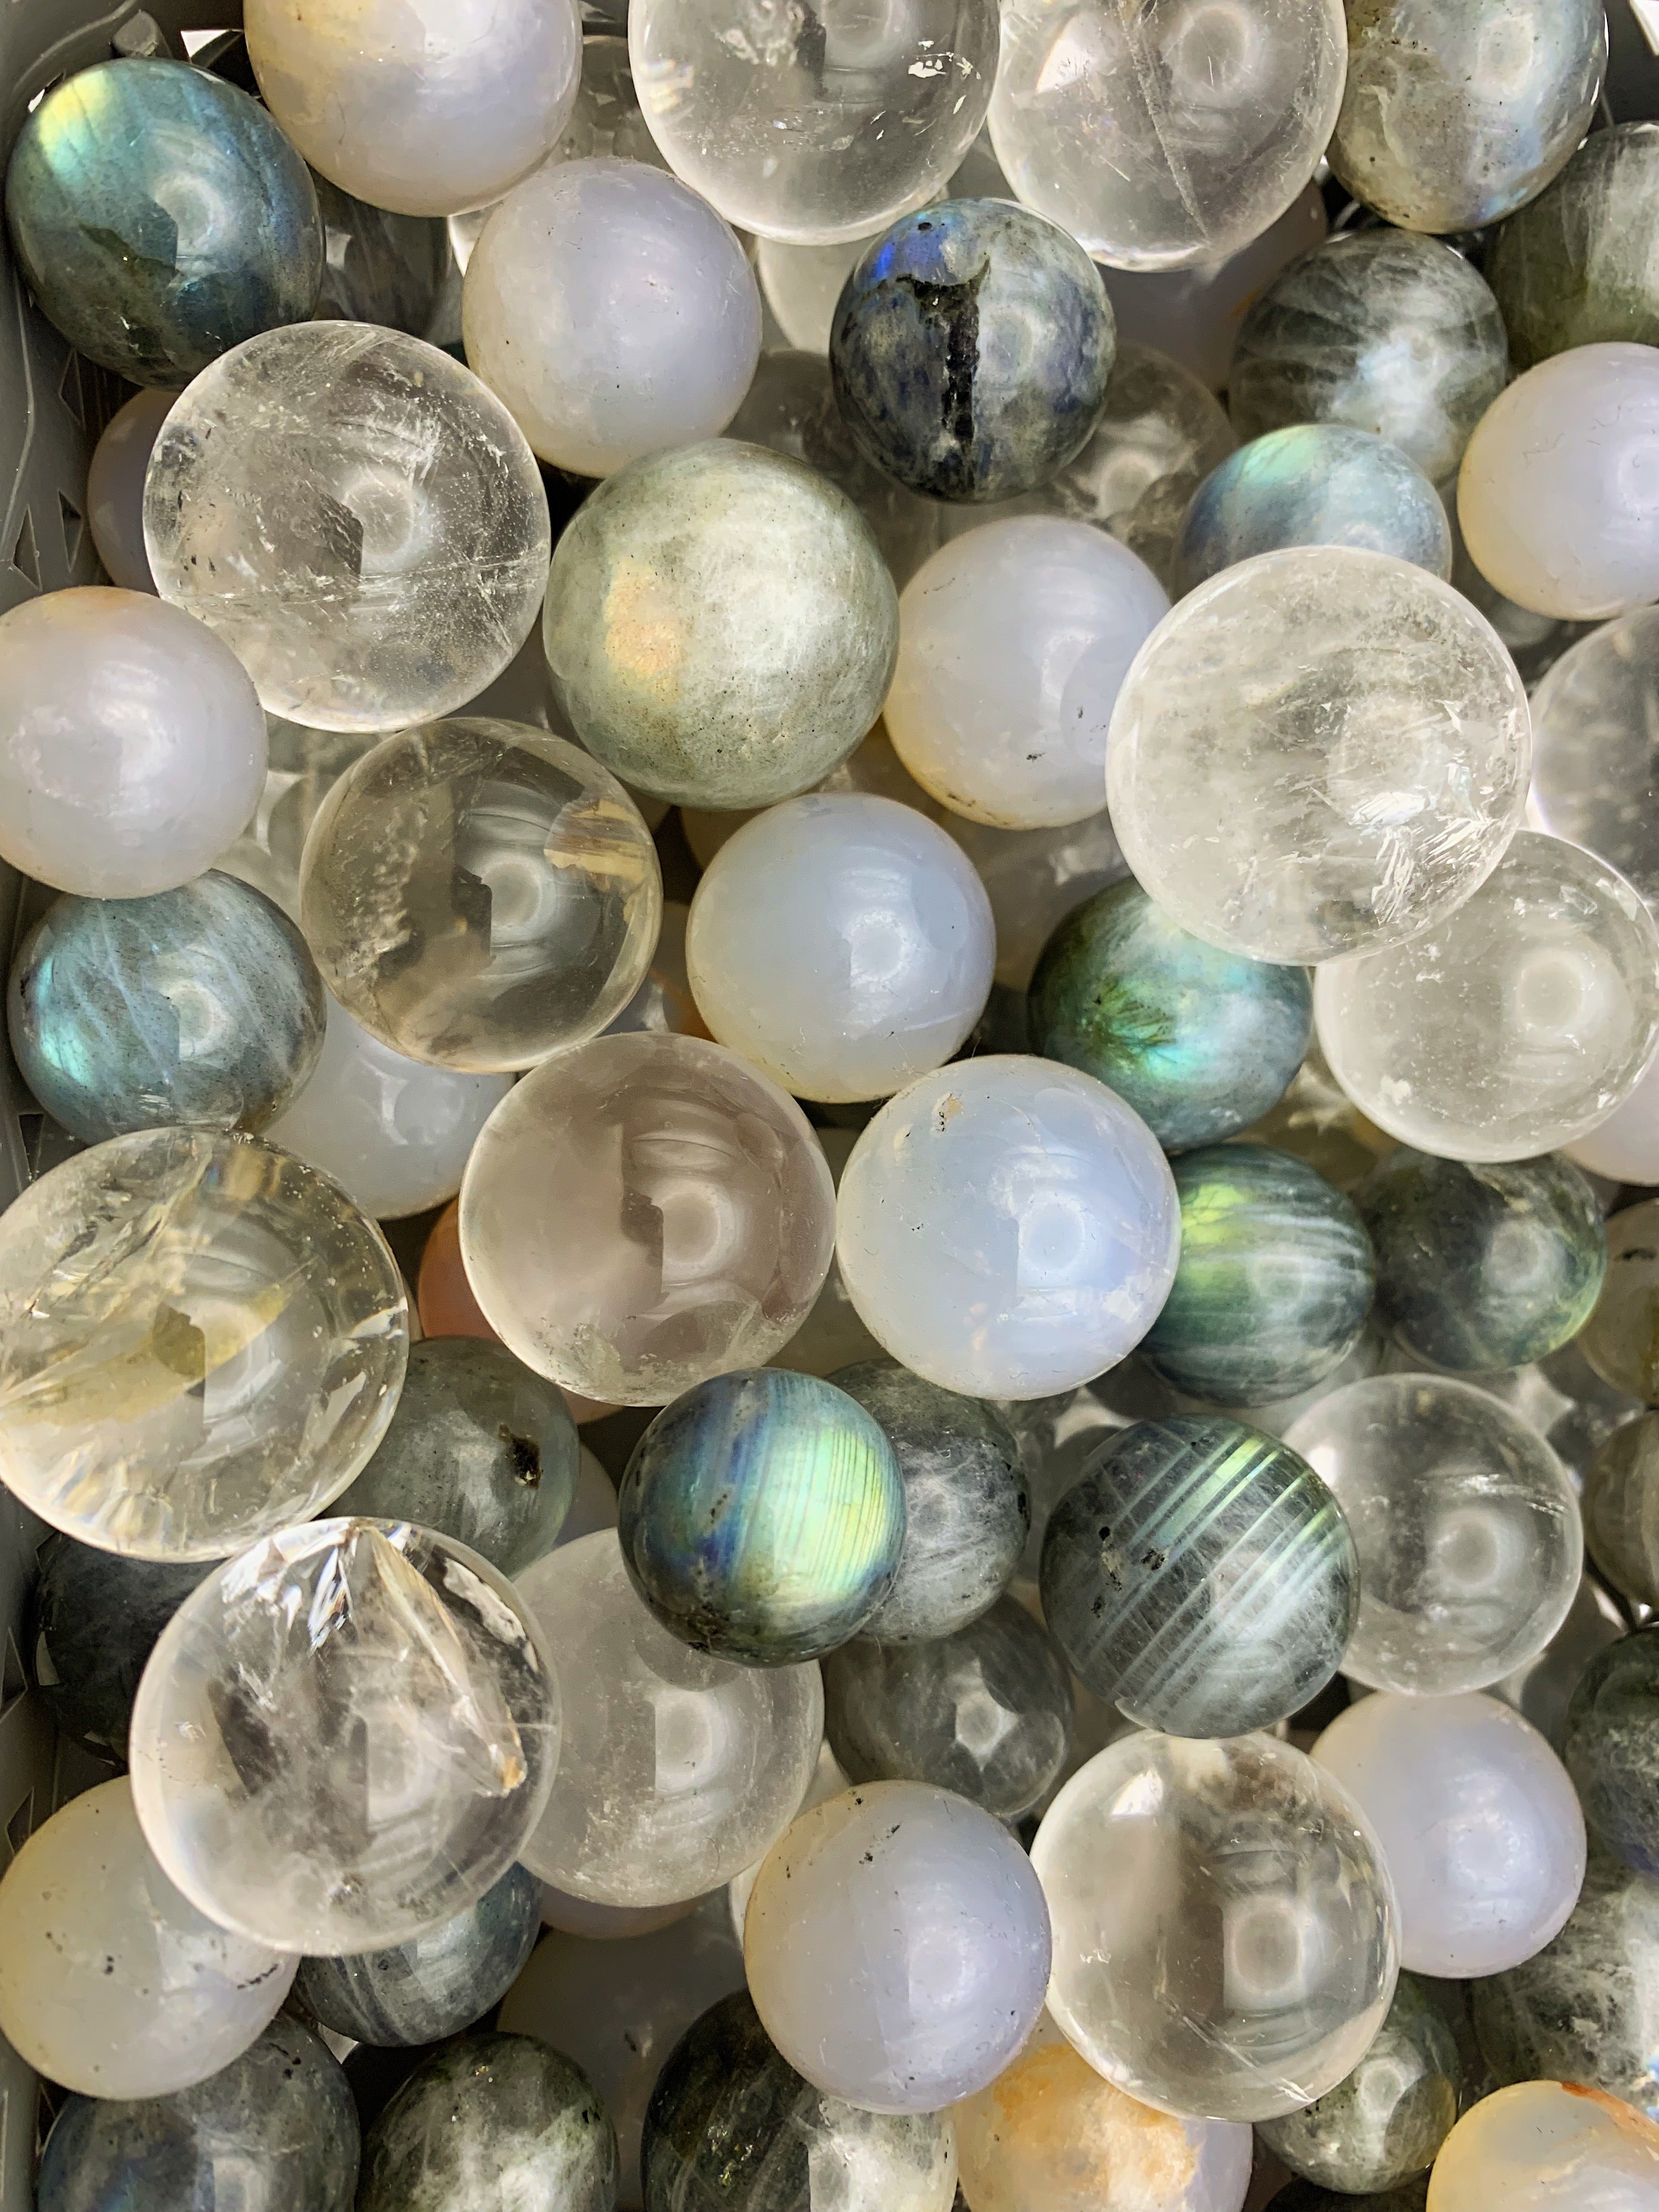 Mini Crystal Spheres (Intuitively Selected) - Earthly Secrets